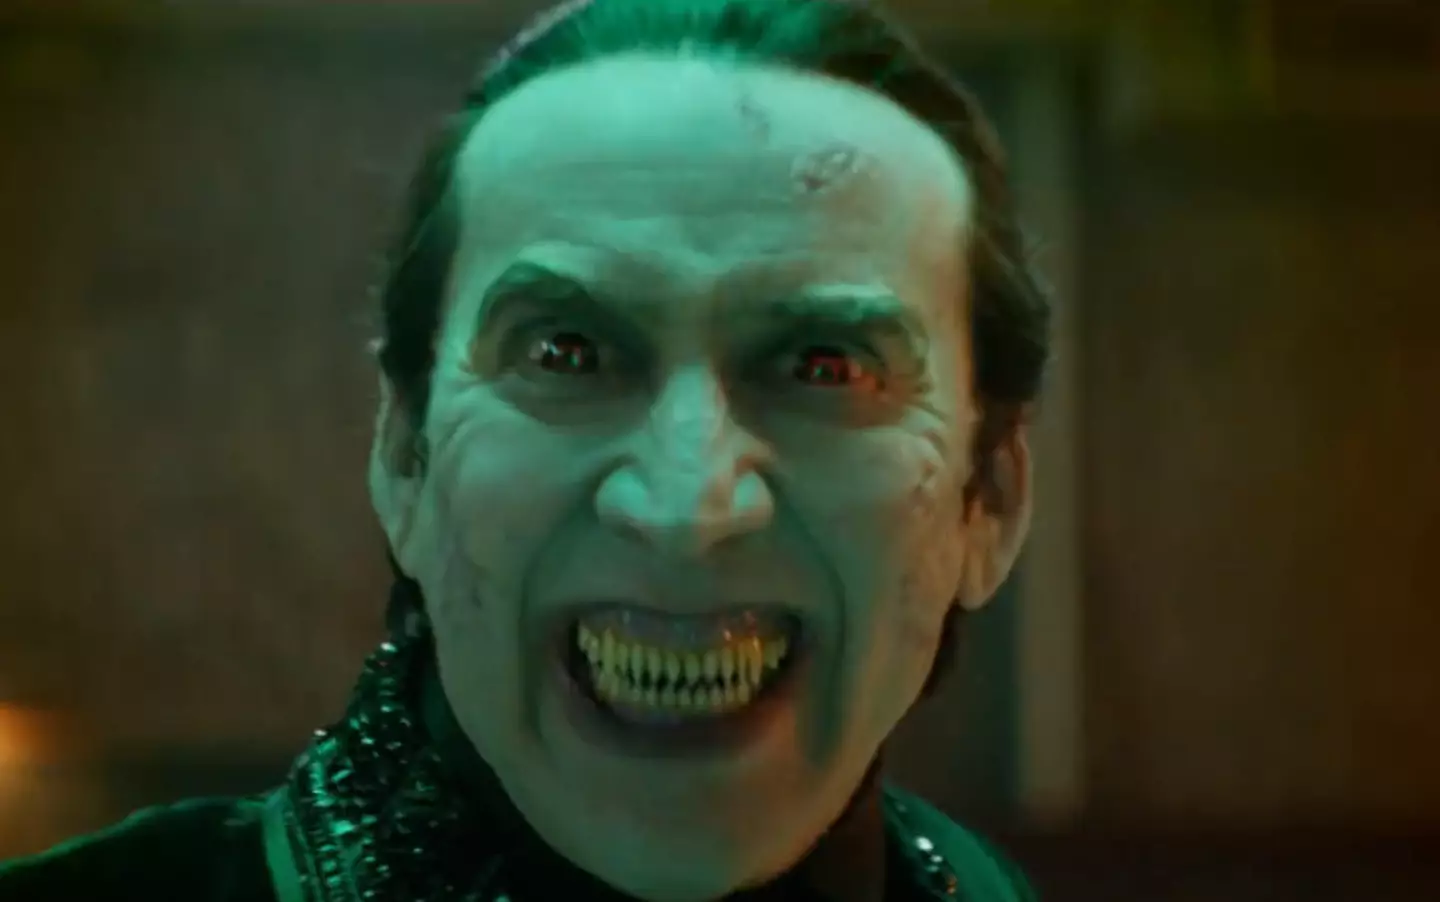 Fans of Cage have flocked to the final trailer in excitement over the upcoming release.